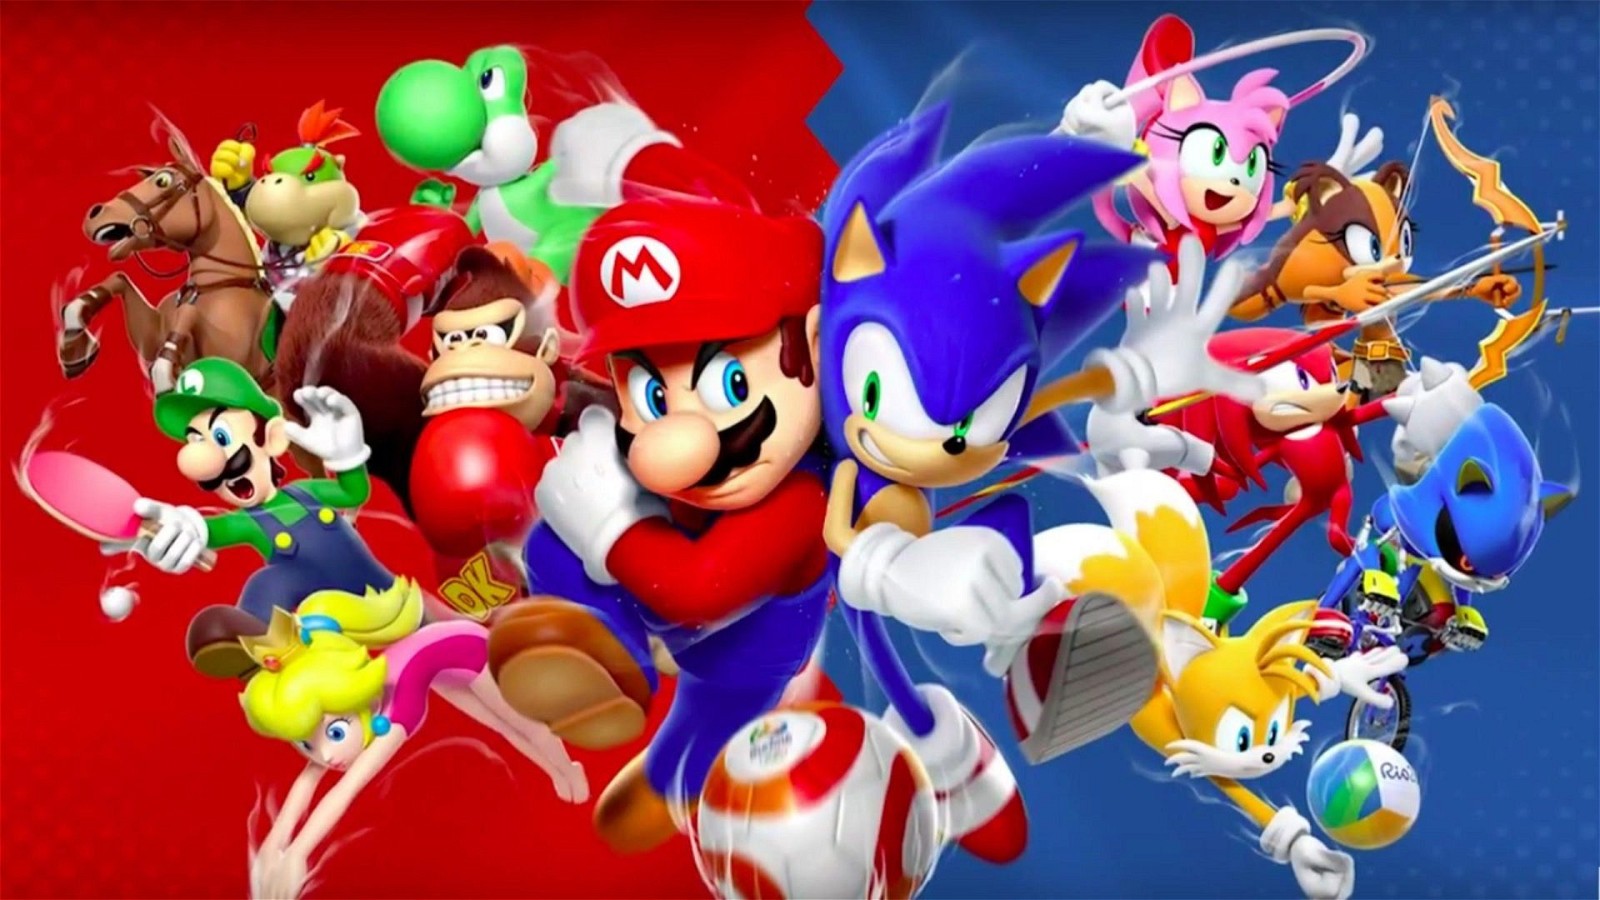 Sonic and Mario are due to renew their battle anew next month, with their release of the respective titles.